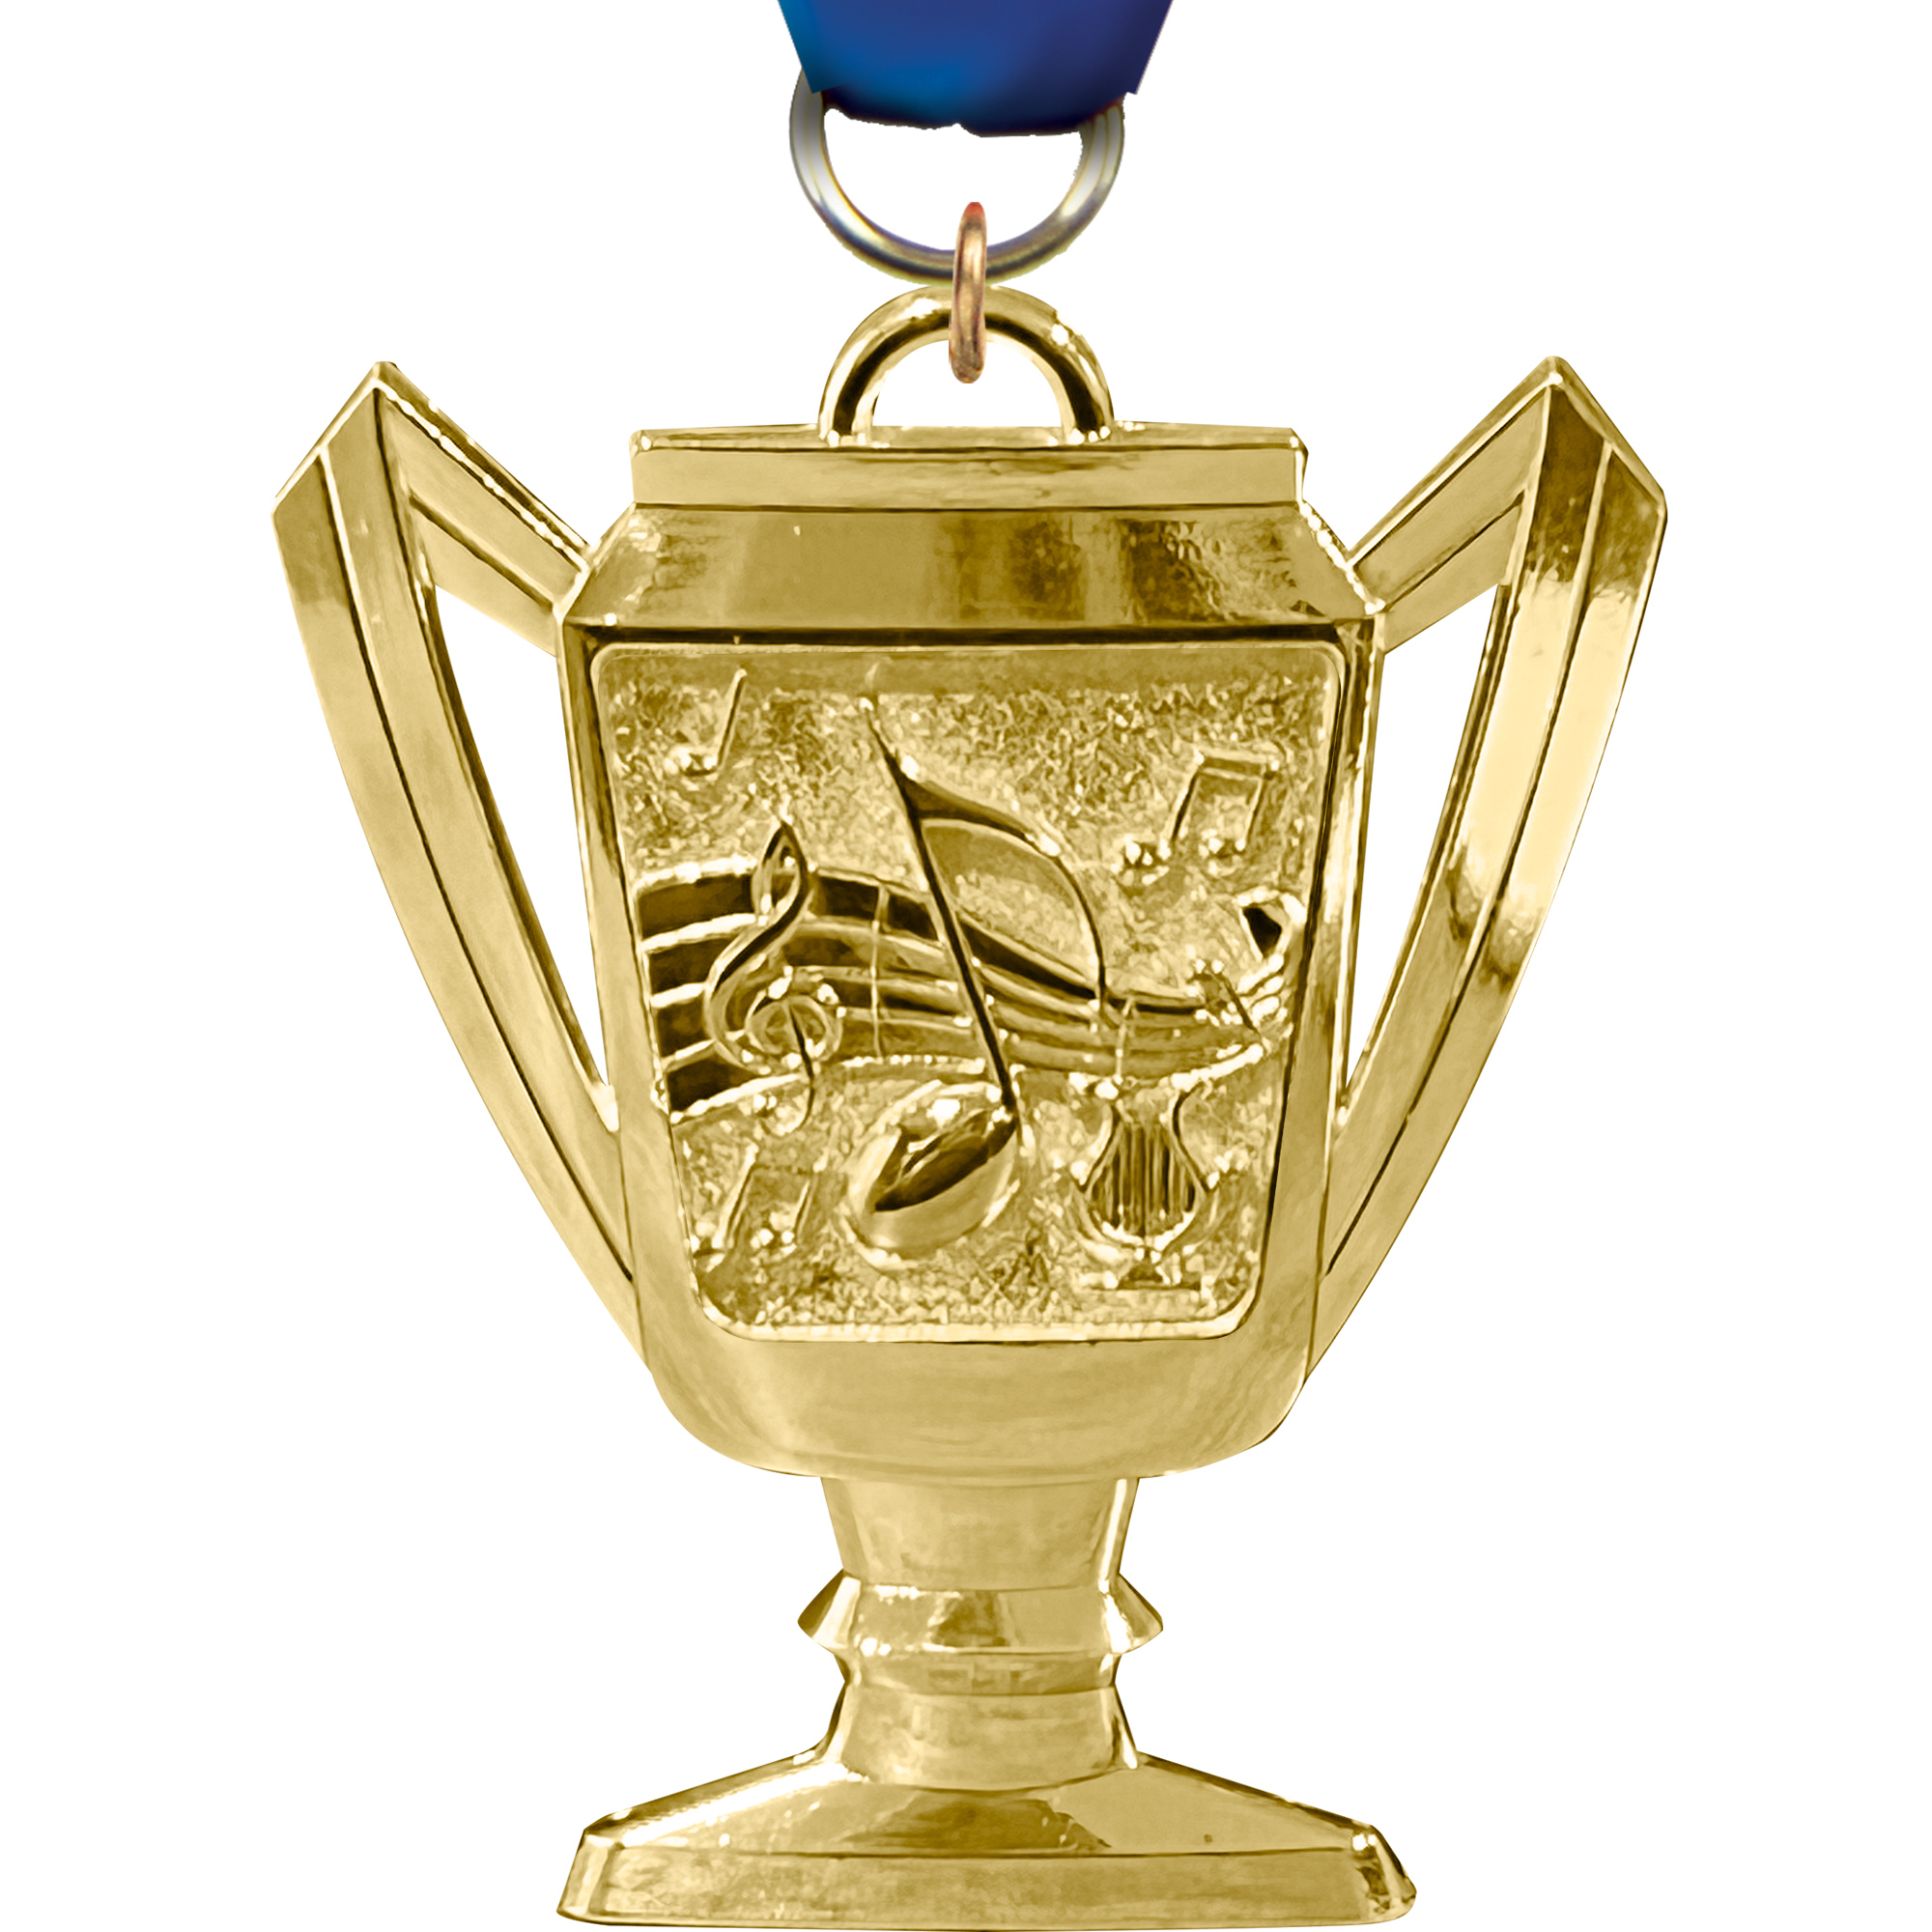 Music Bright Gold Trophy Cup Medal